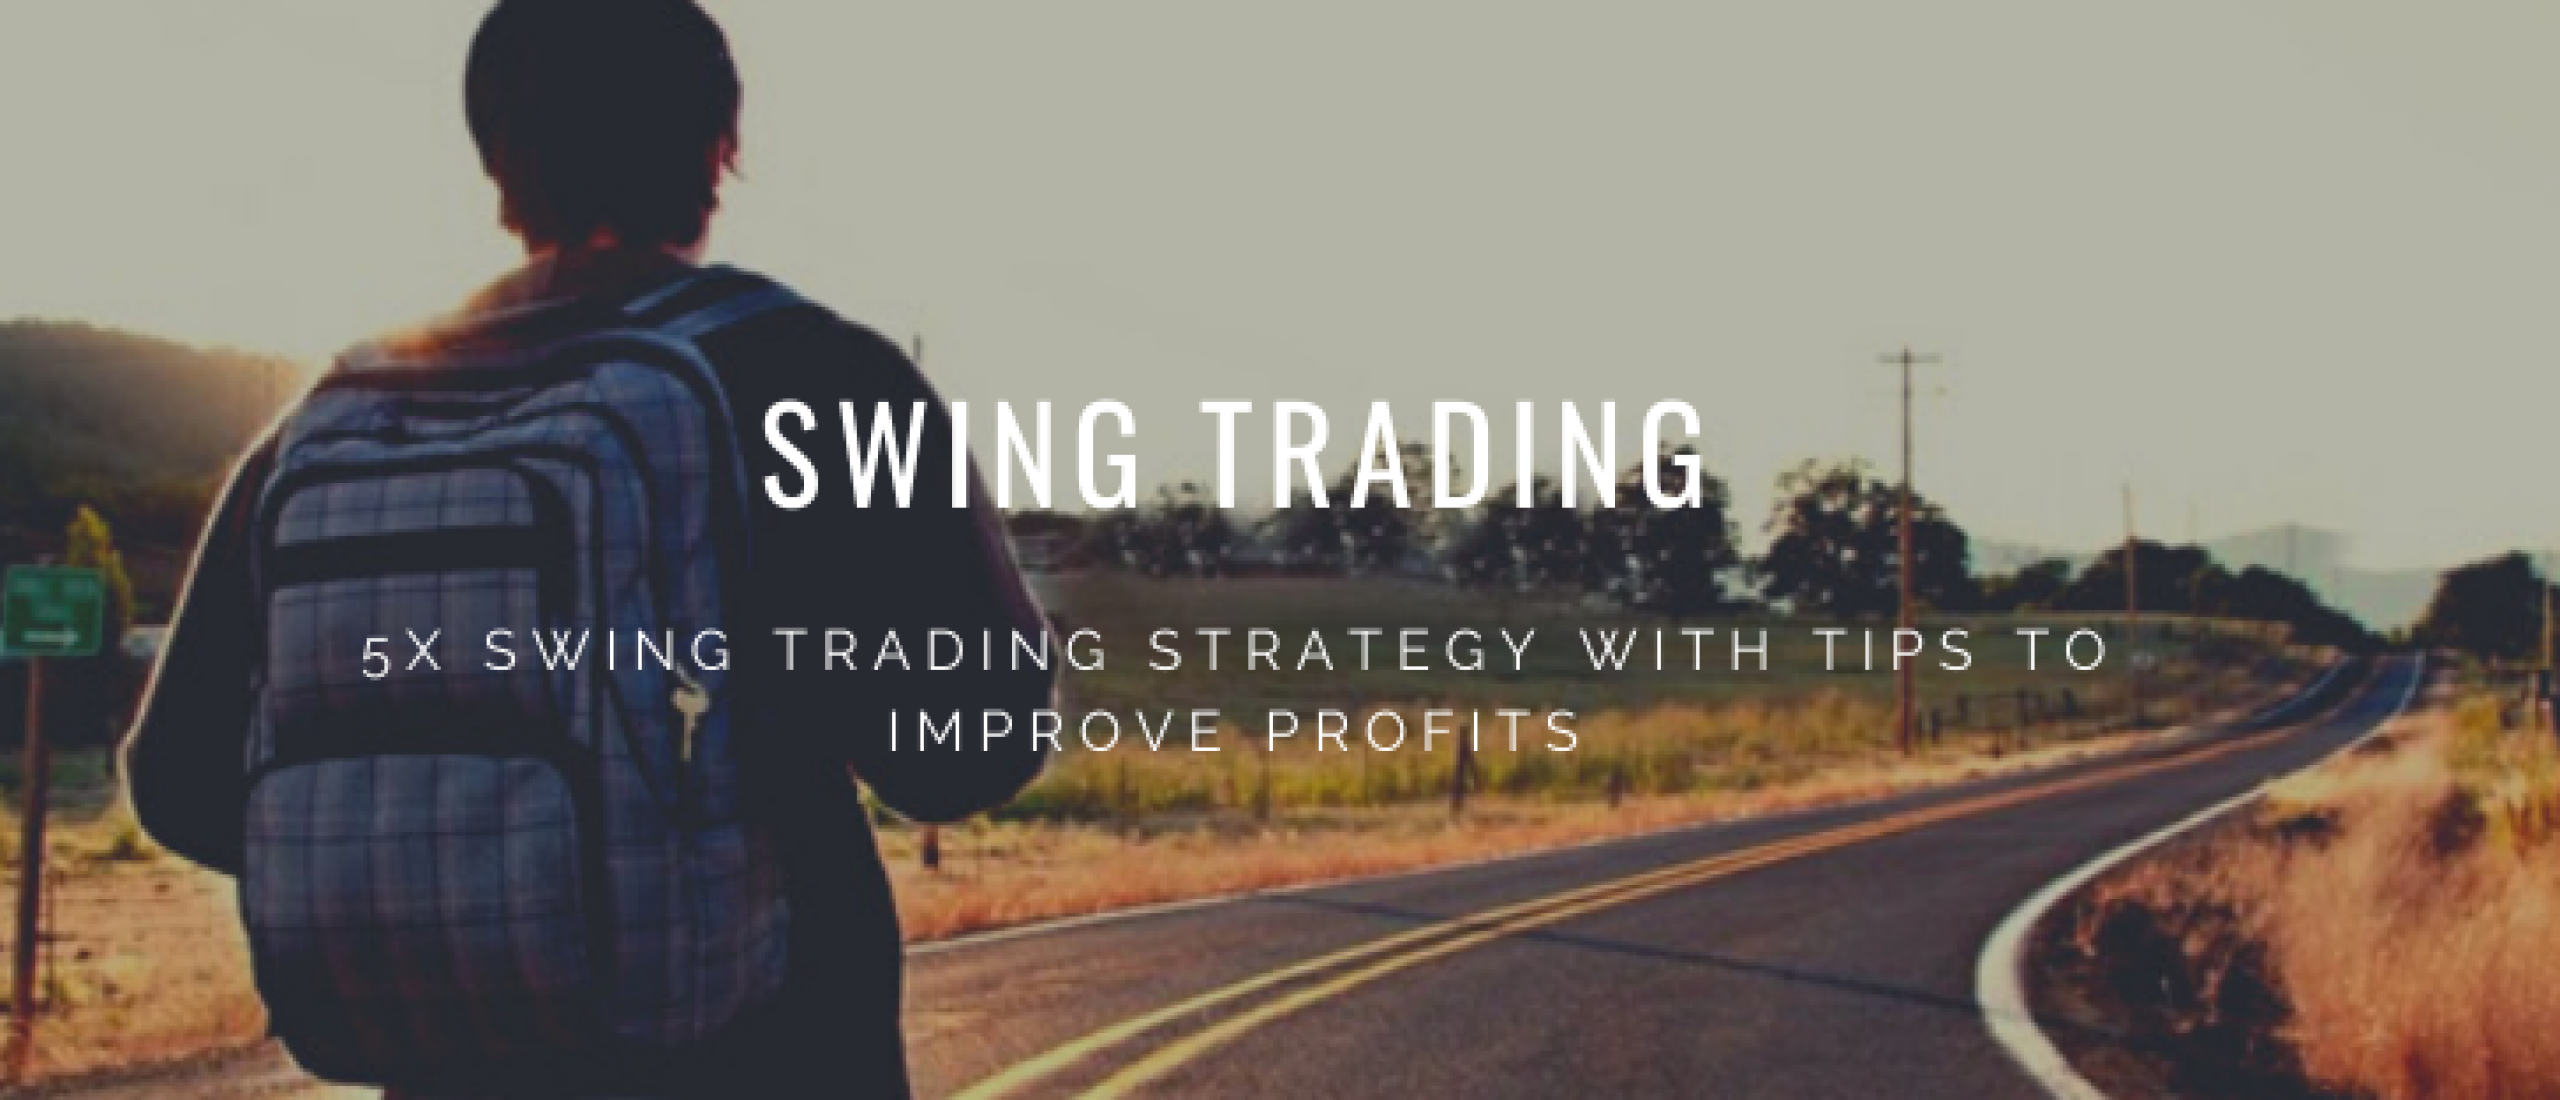 5x Swing Trading Strategy: Tips to Increase Profits